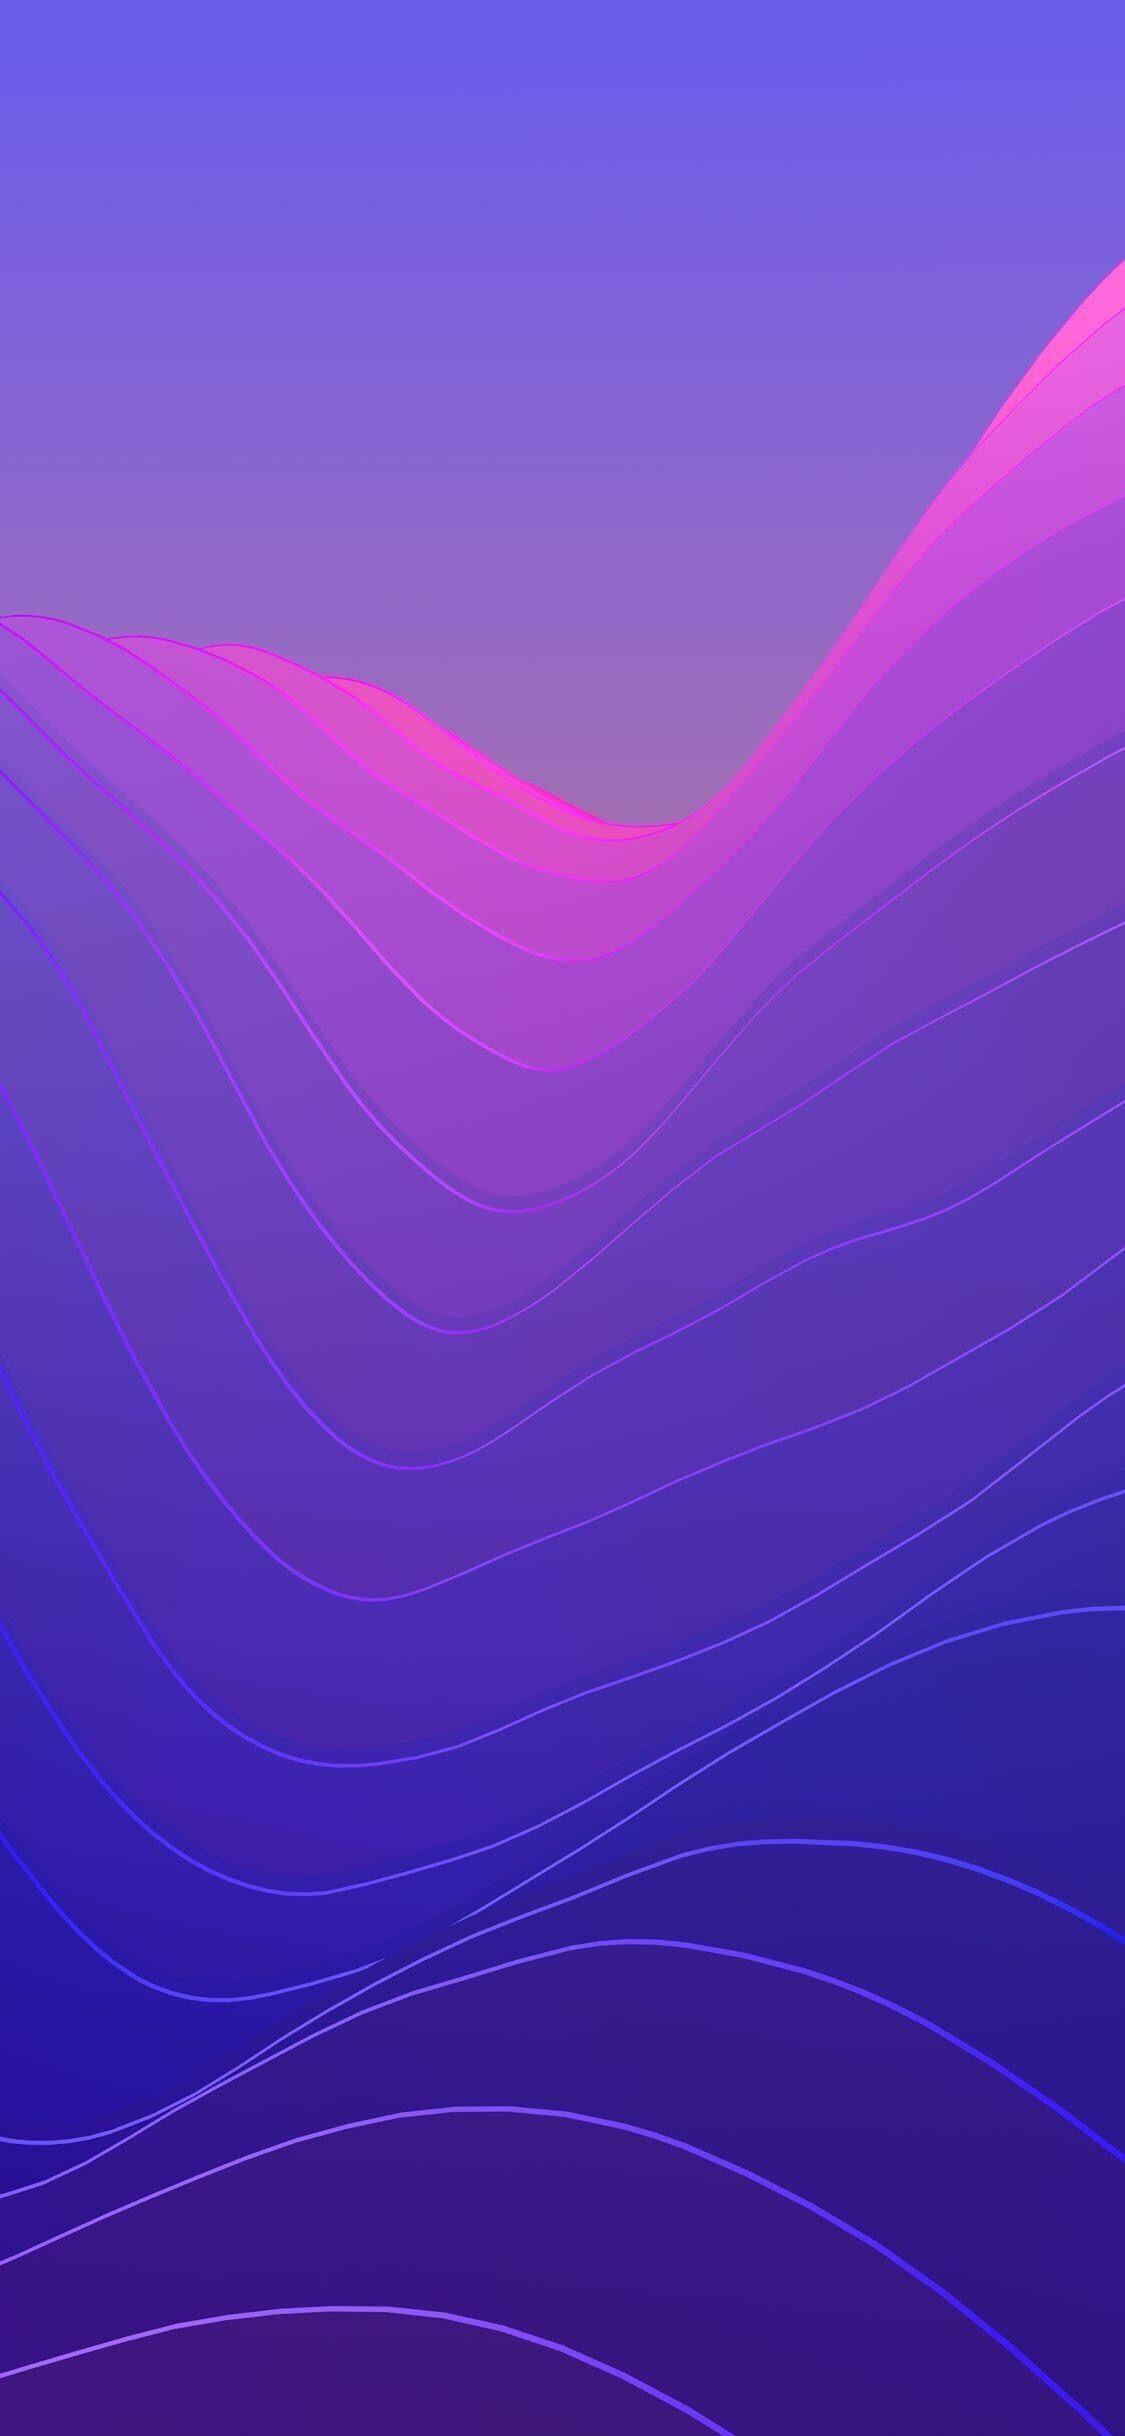 Ios iPhone X, Purple, Blue, Clean, Simple, Abstract